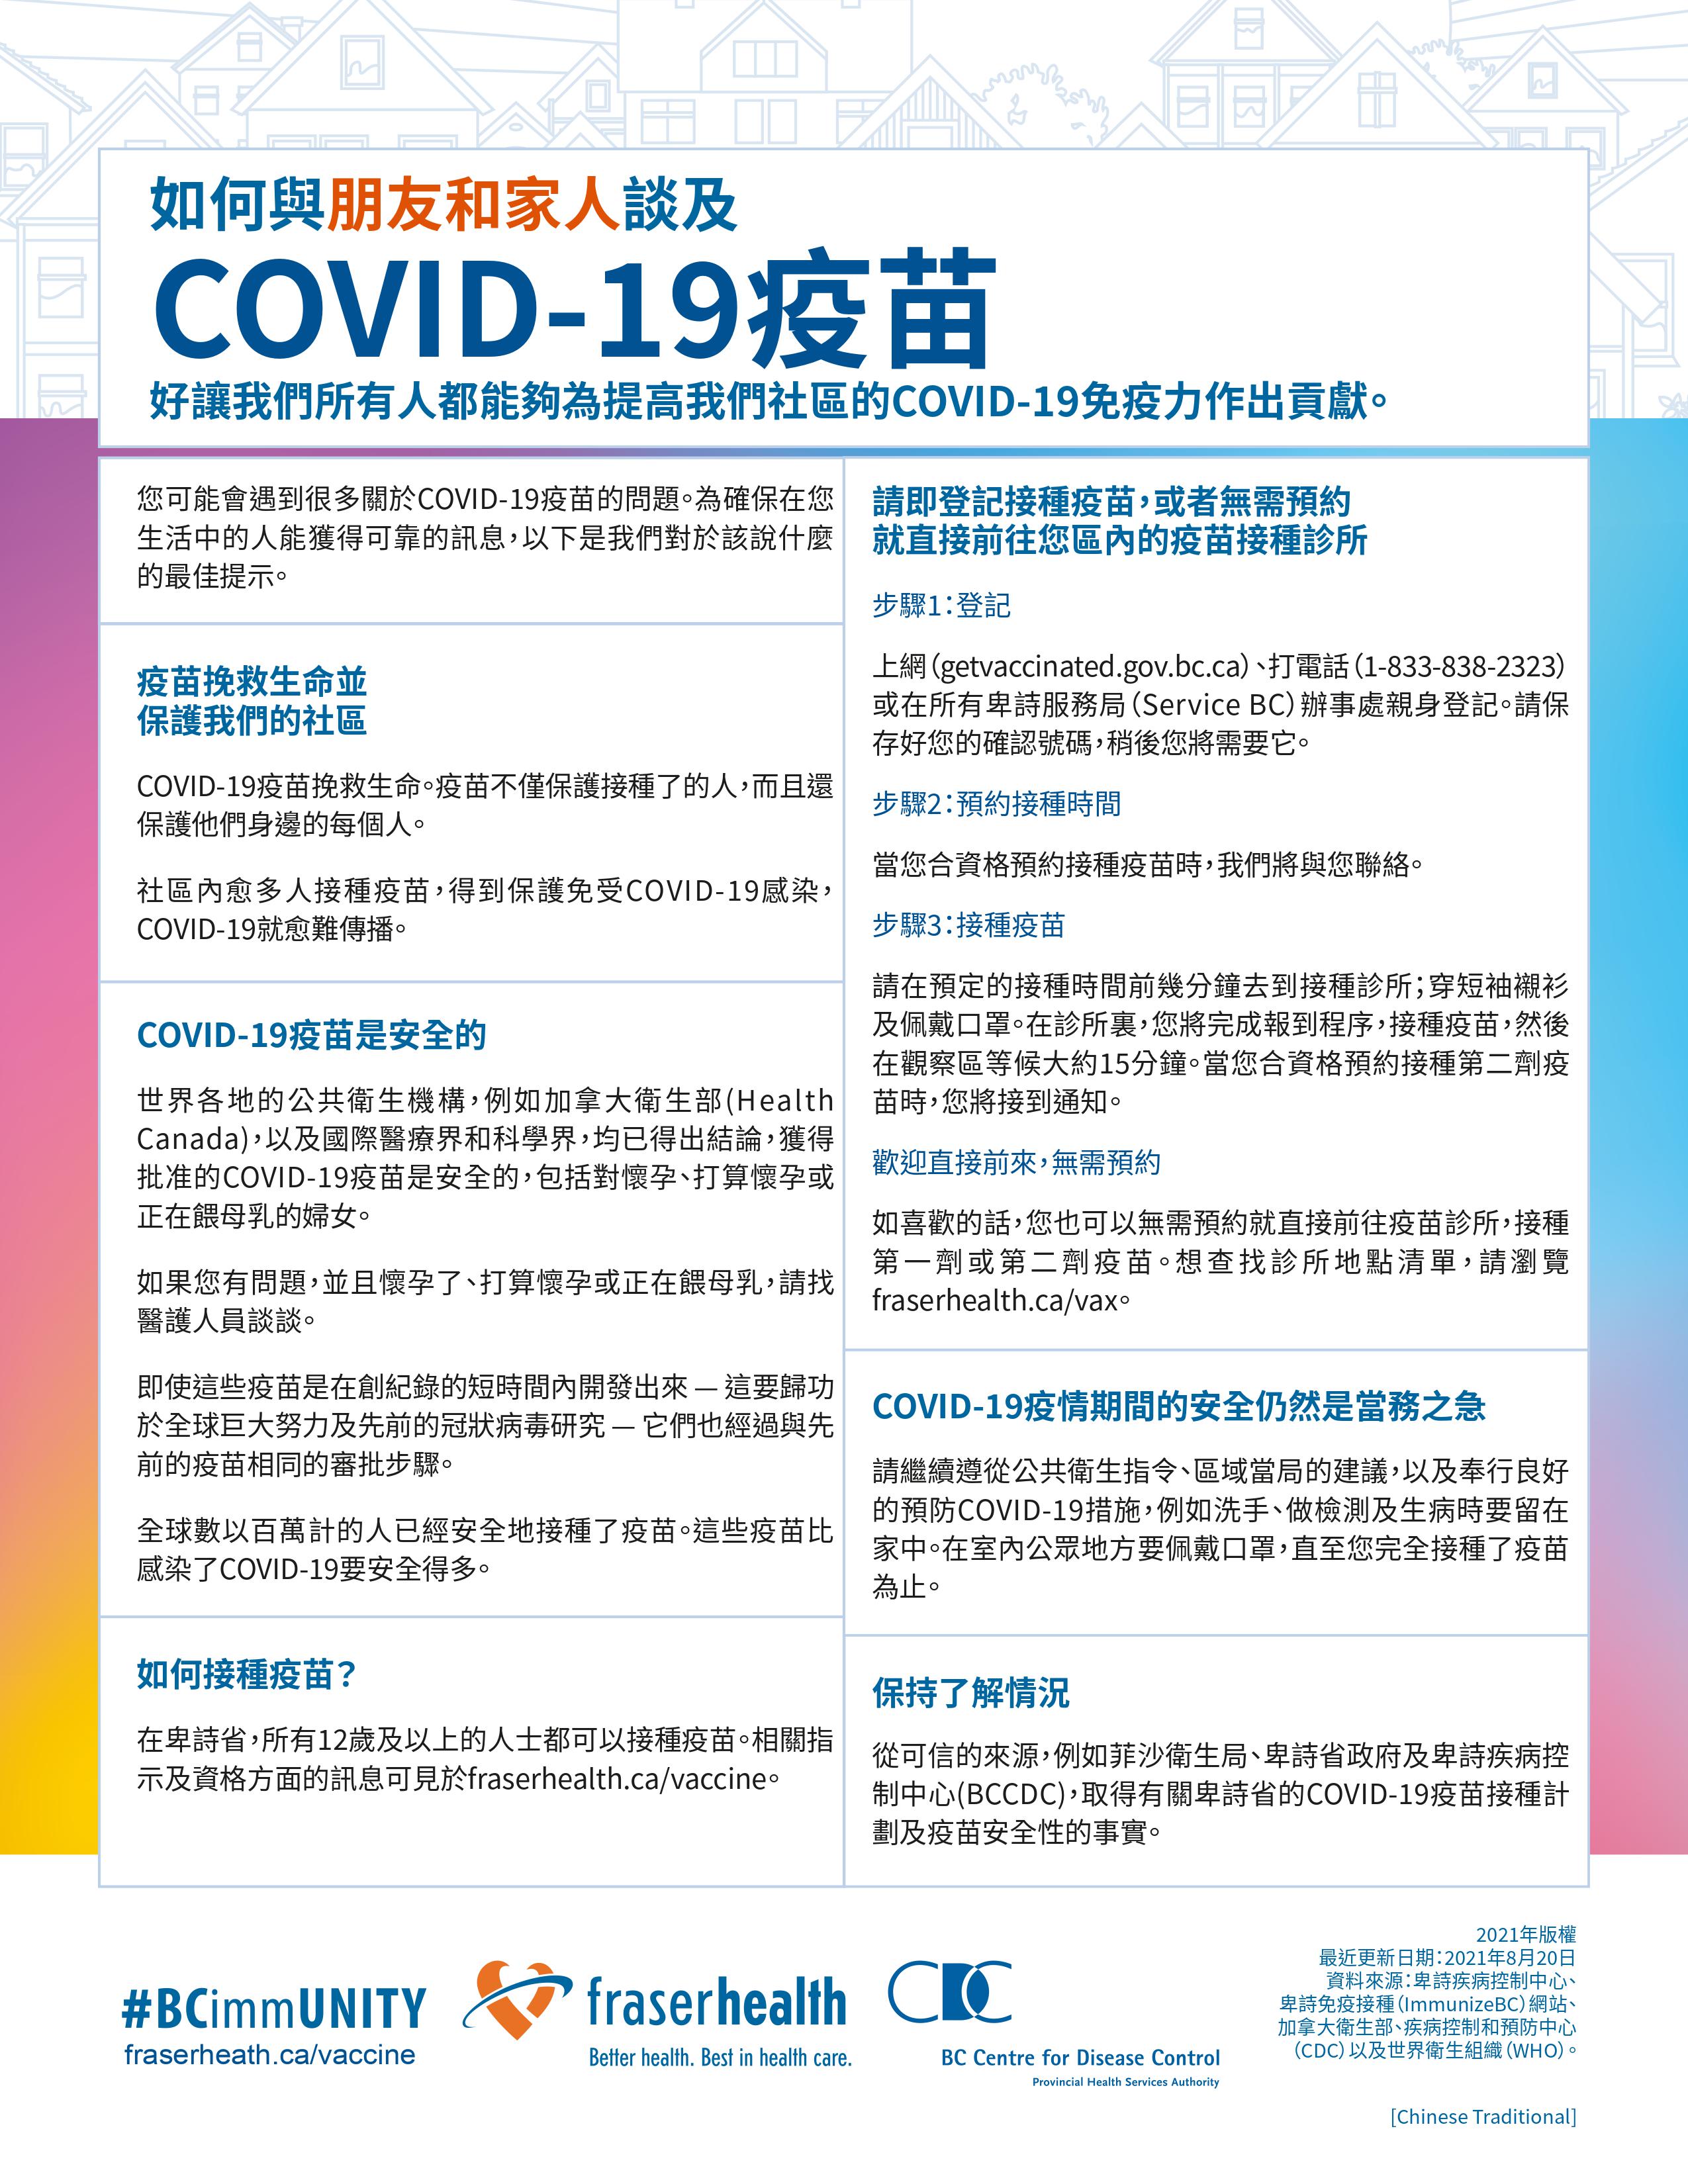 Infographic on how to talk to your friends about COVID-19 vaccines in Traditional Chinese